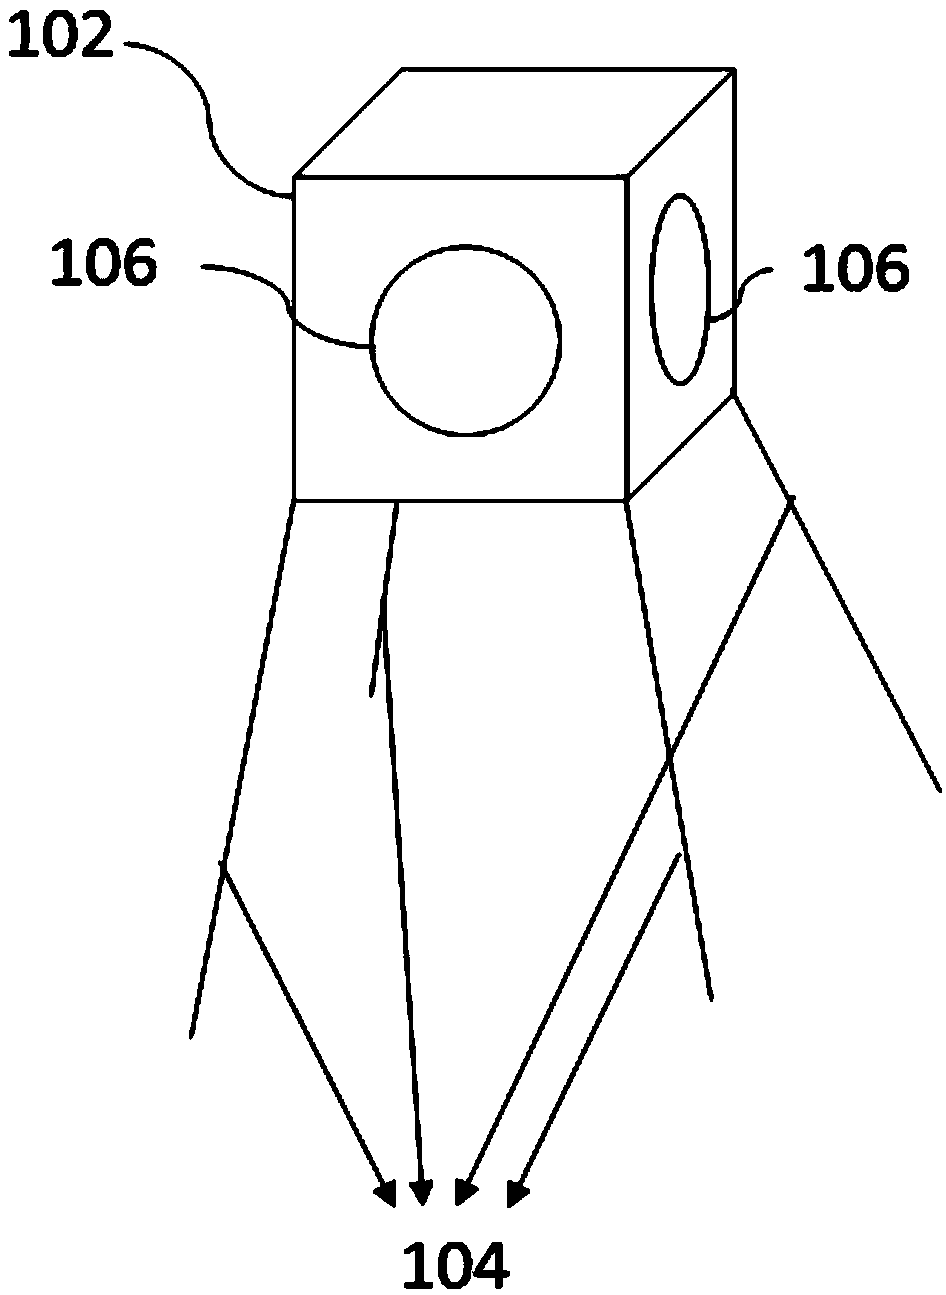 Peripheral environment scanning method and system